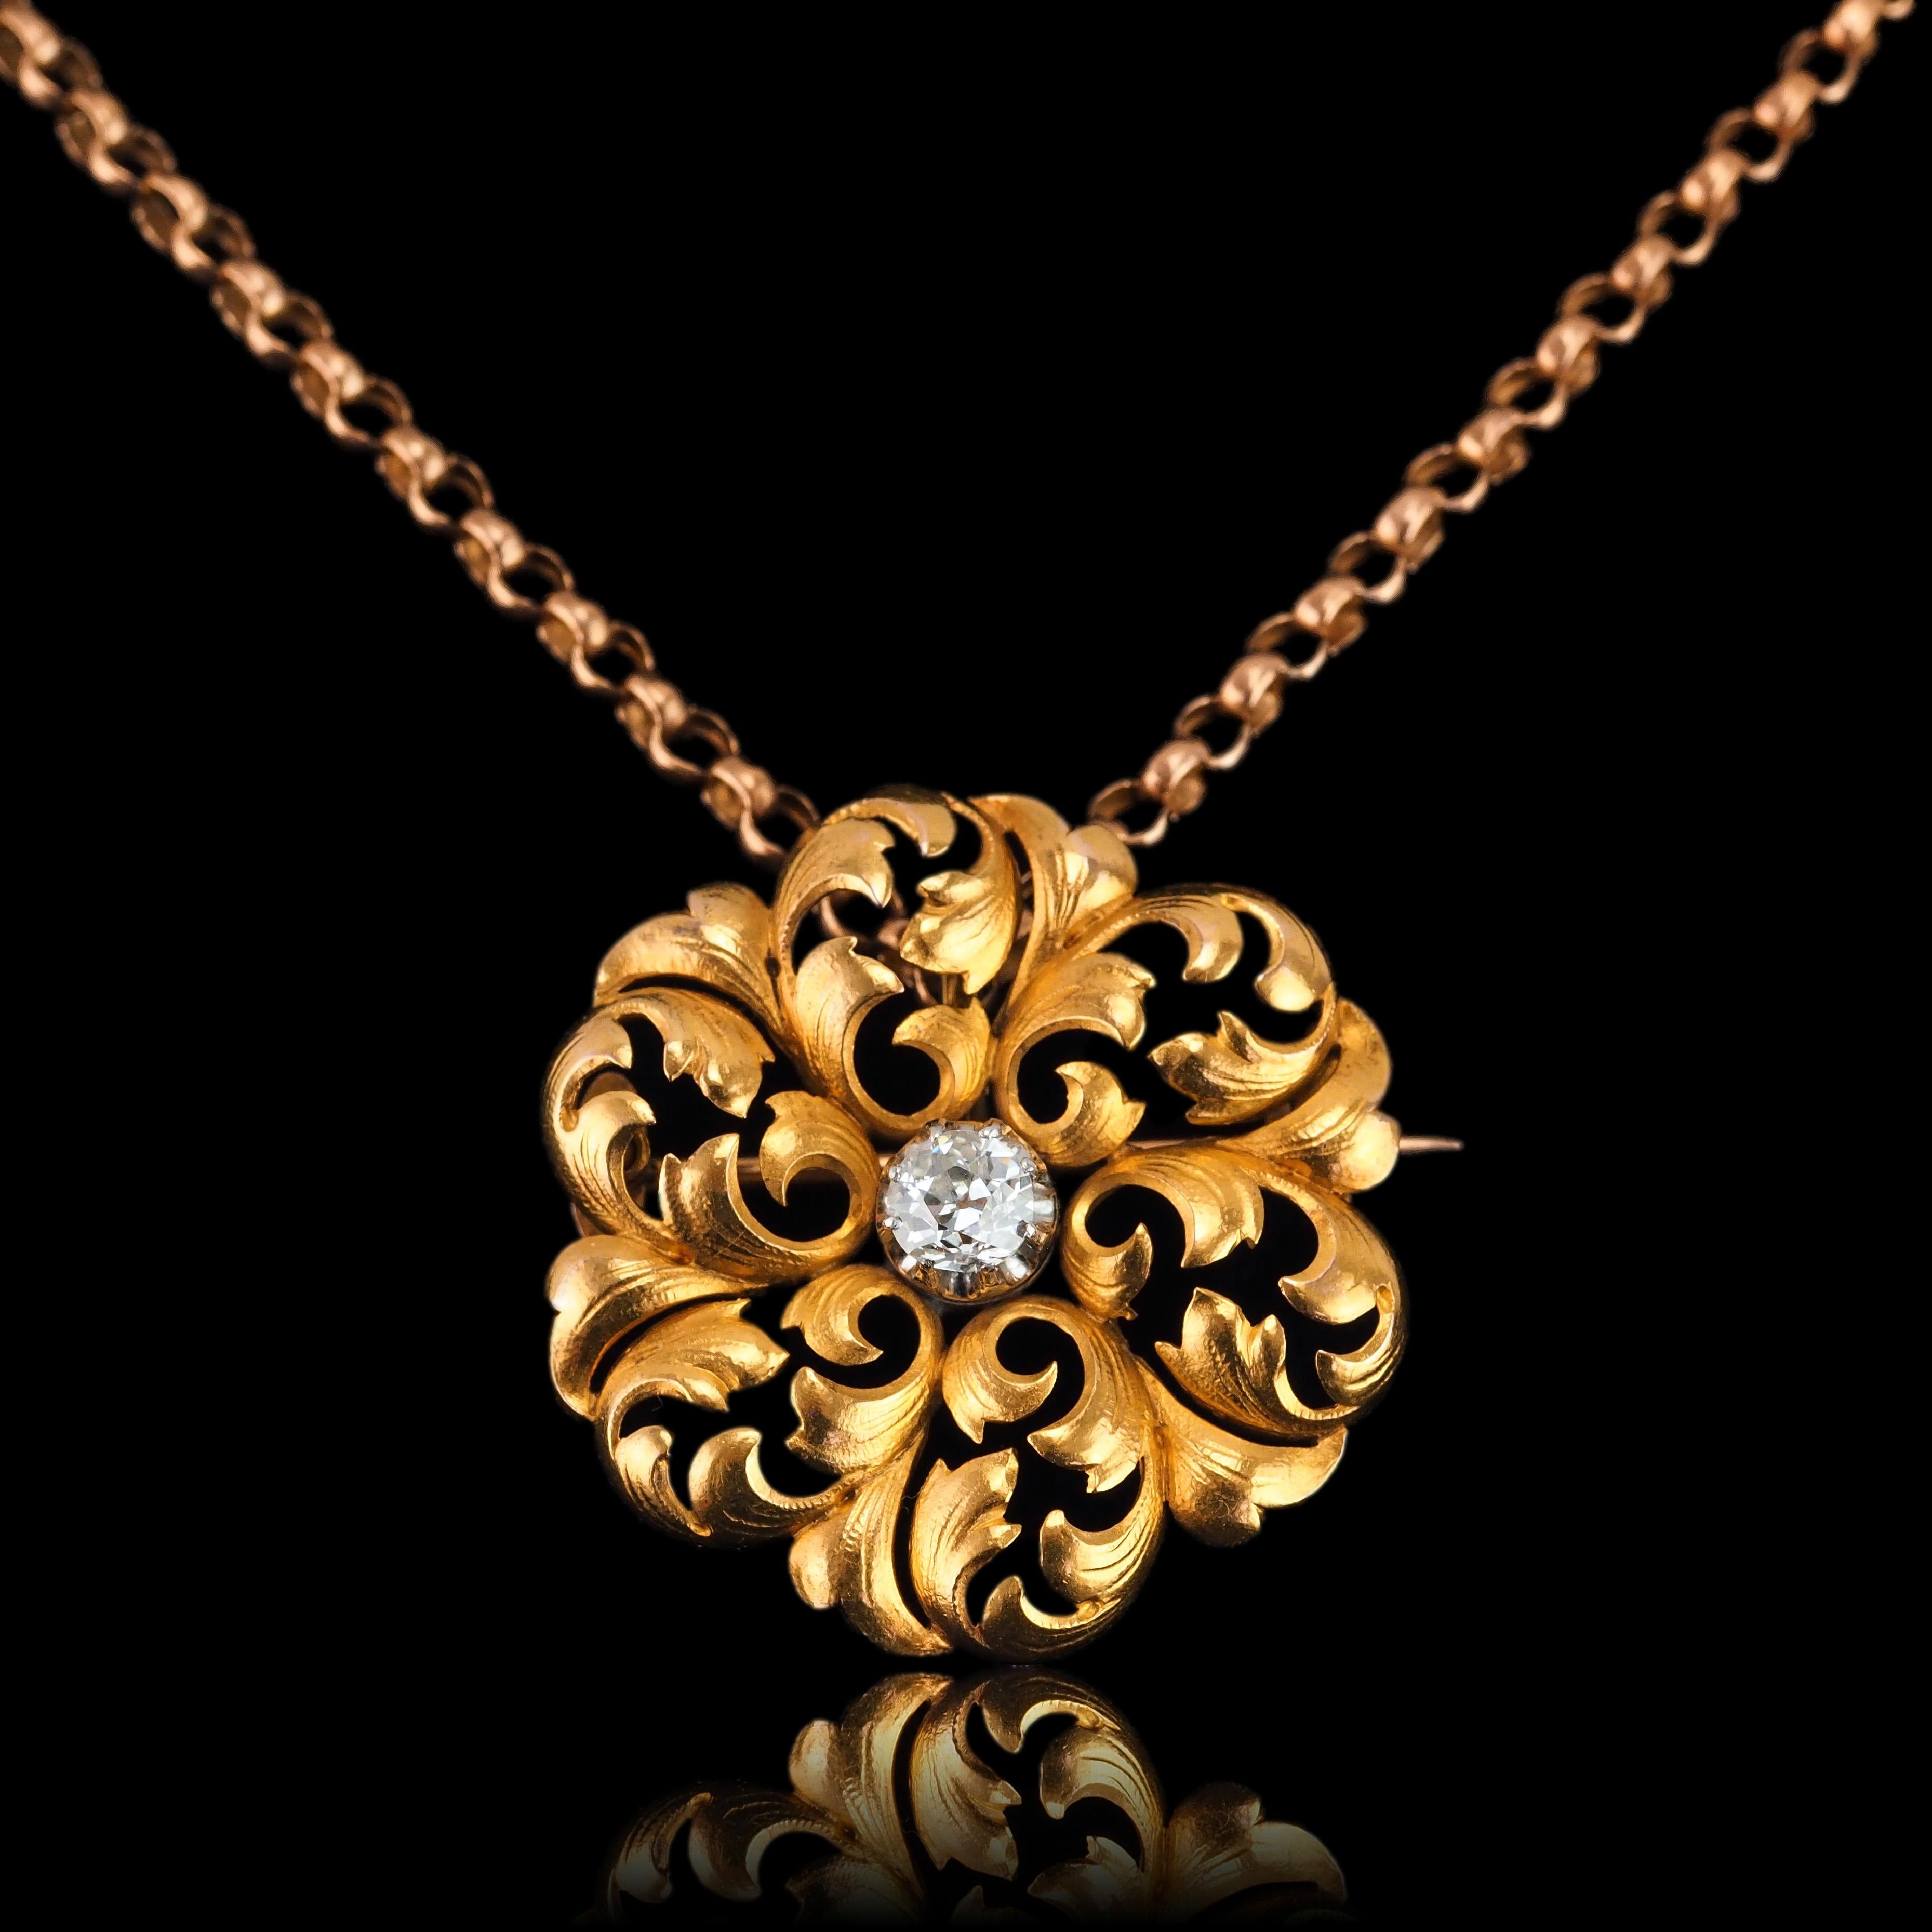 Women's or Men's Antique French Diamond Necklace 18K Gold Pendant Brooch 19th C. Flower Acanthus For Sale